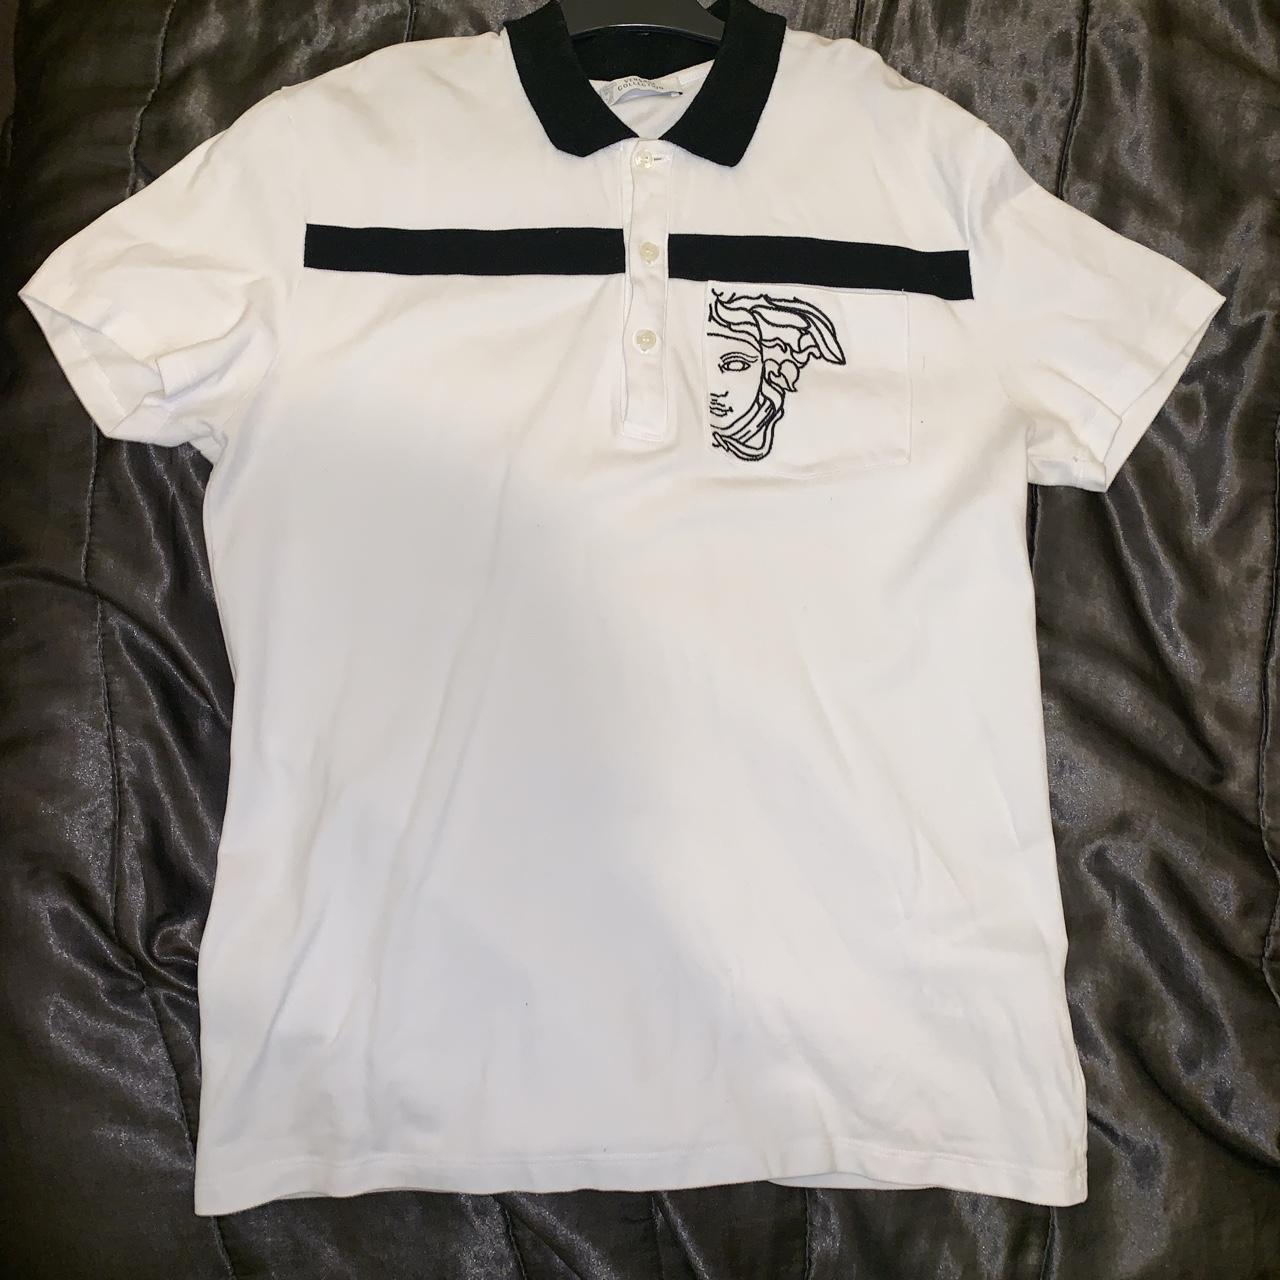 Versace polo shirt for sale black and white great... - Depop